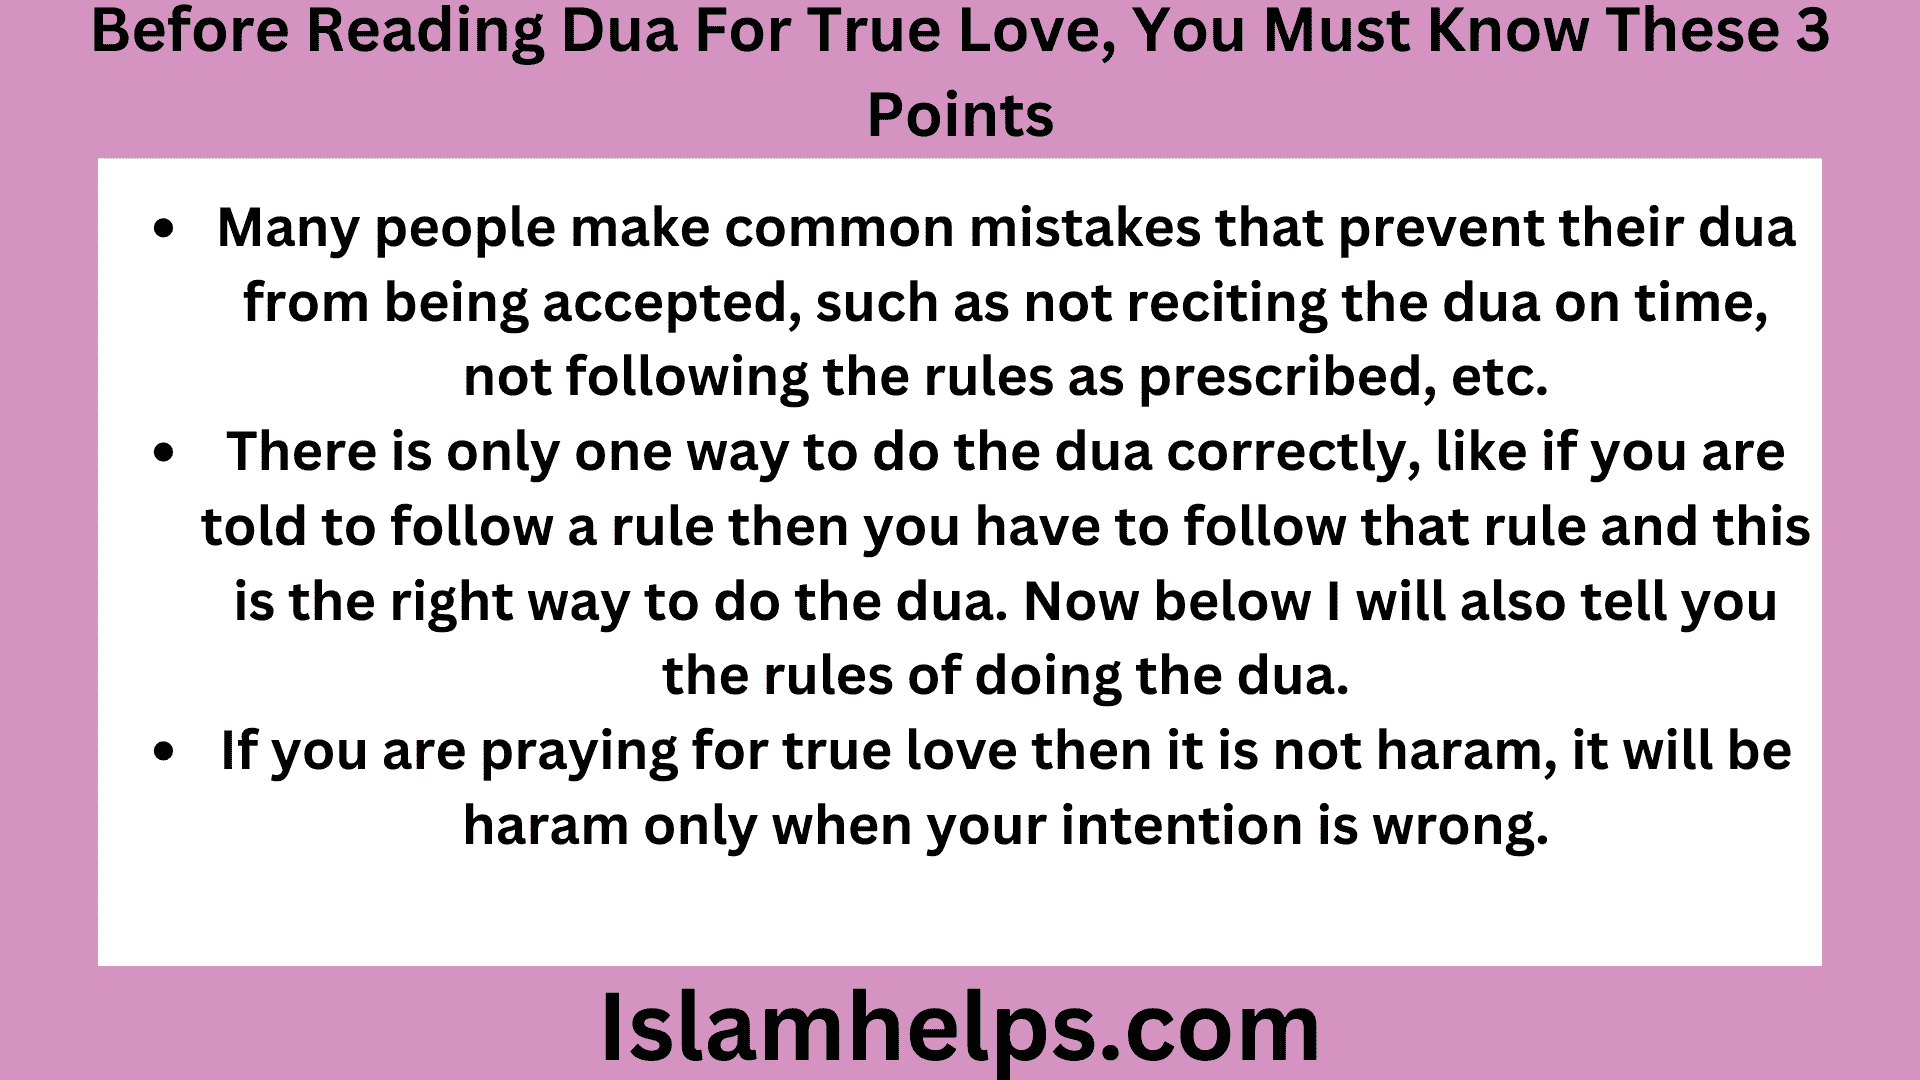 Before Reading Dua For True Love, You Must Know These 3 Points